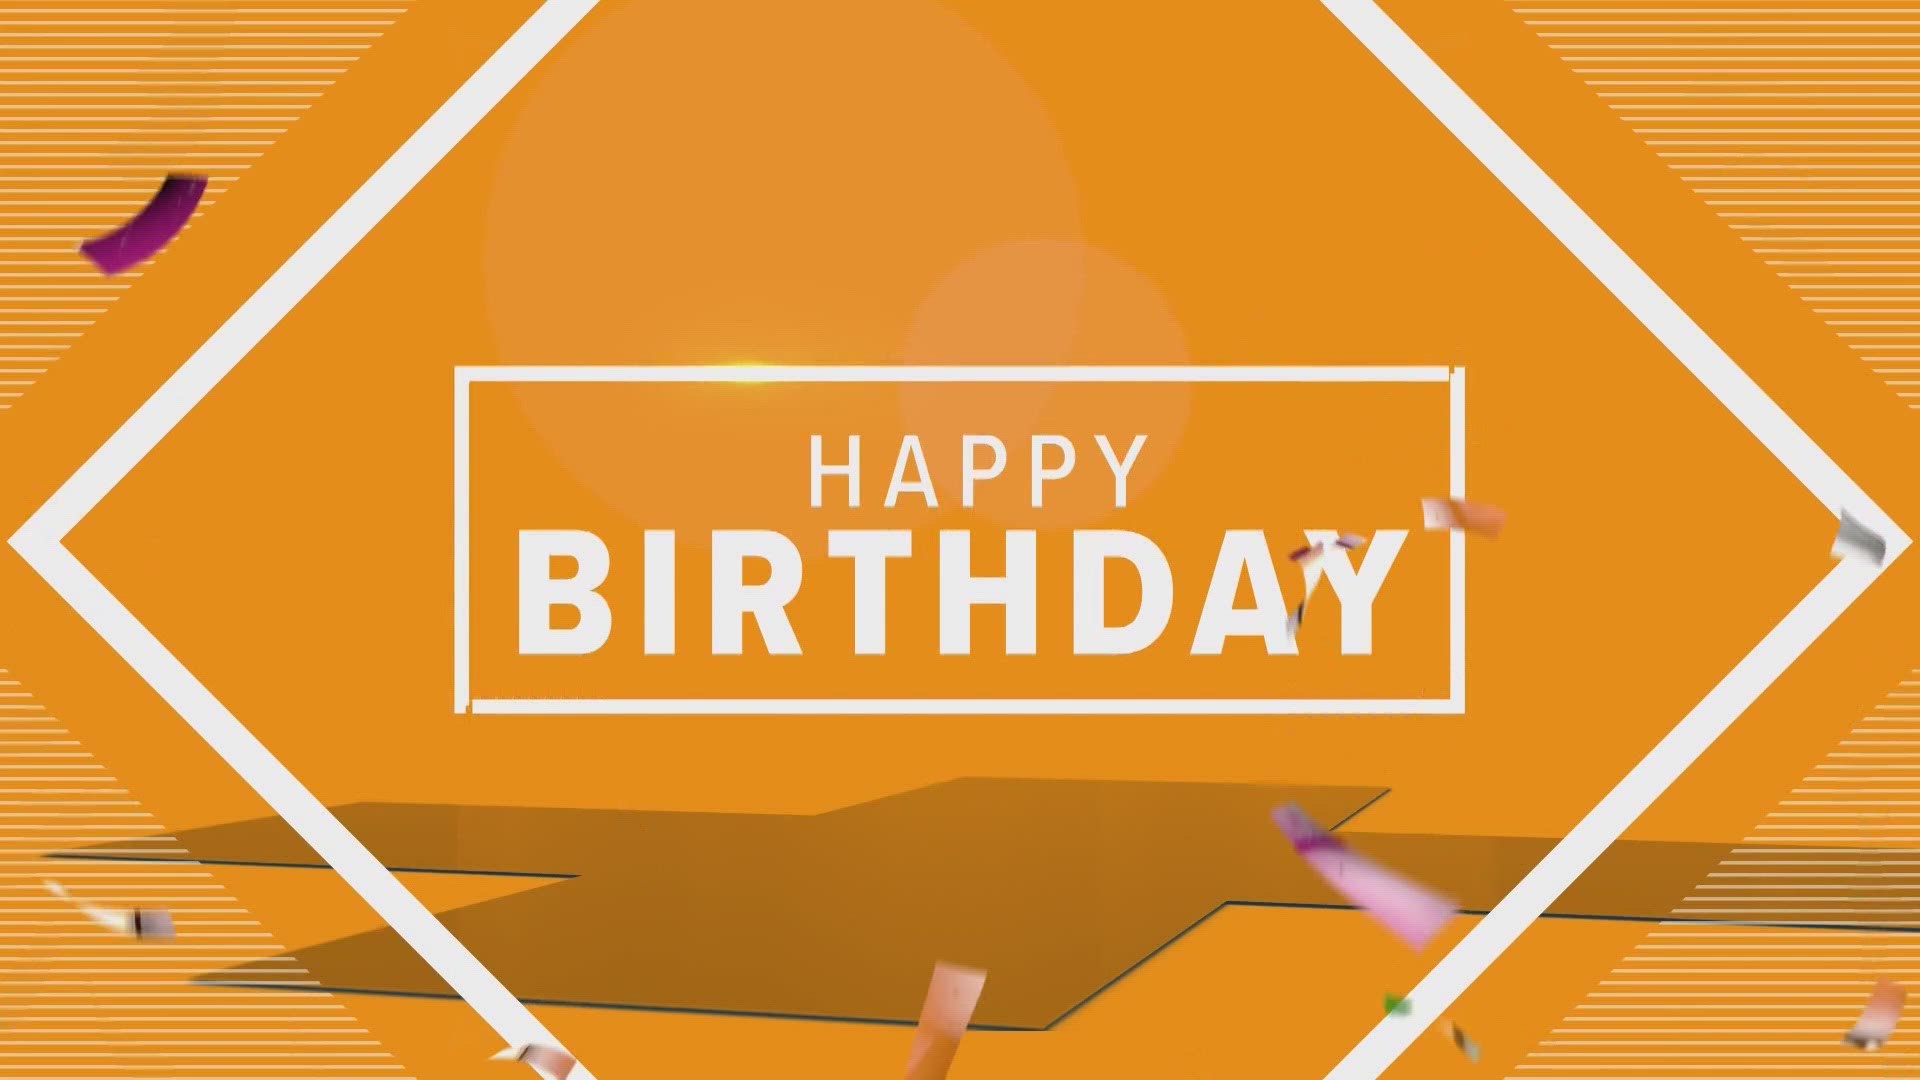 Texas Today is wishing everyone born on October 27, a very happy birthday!